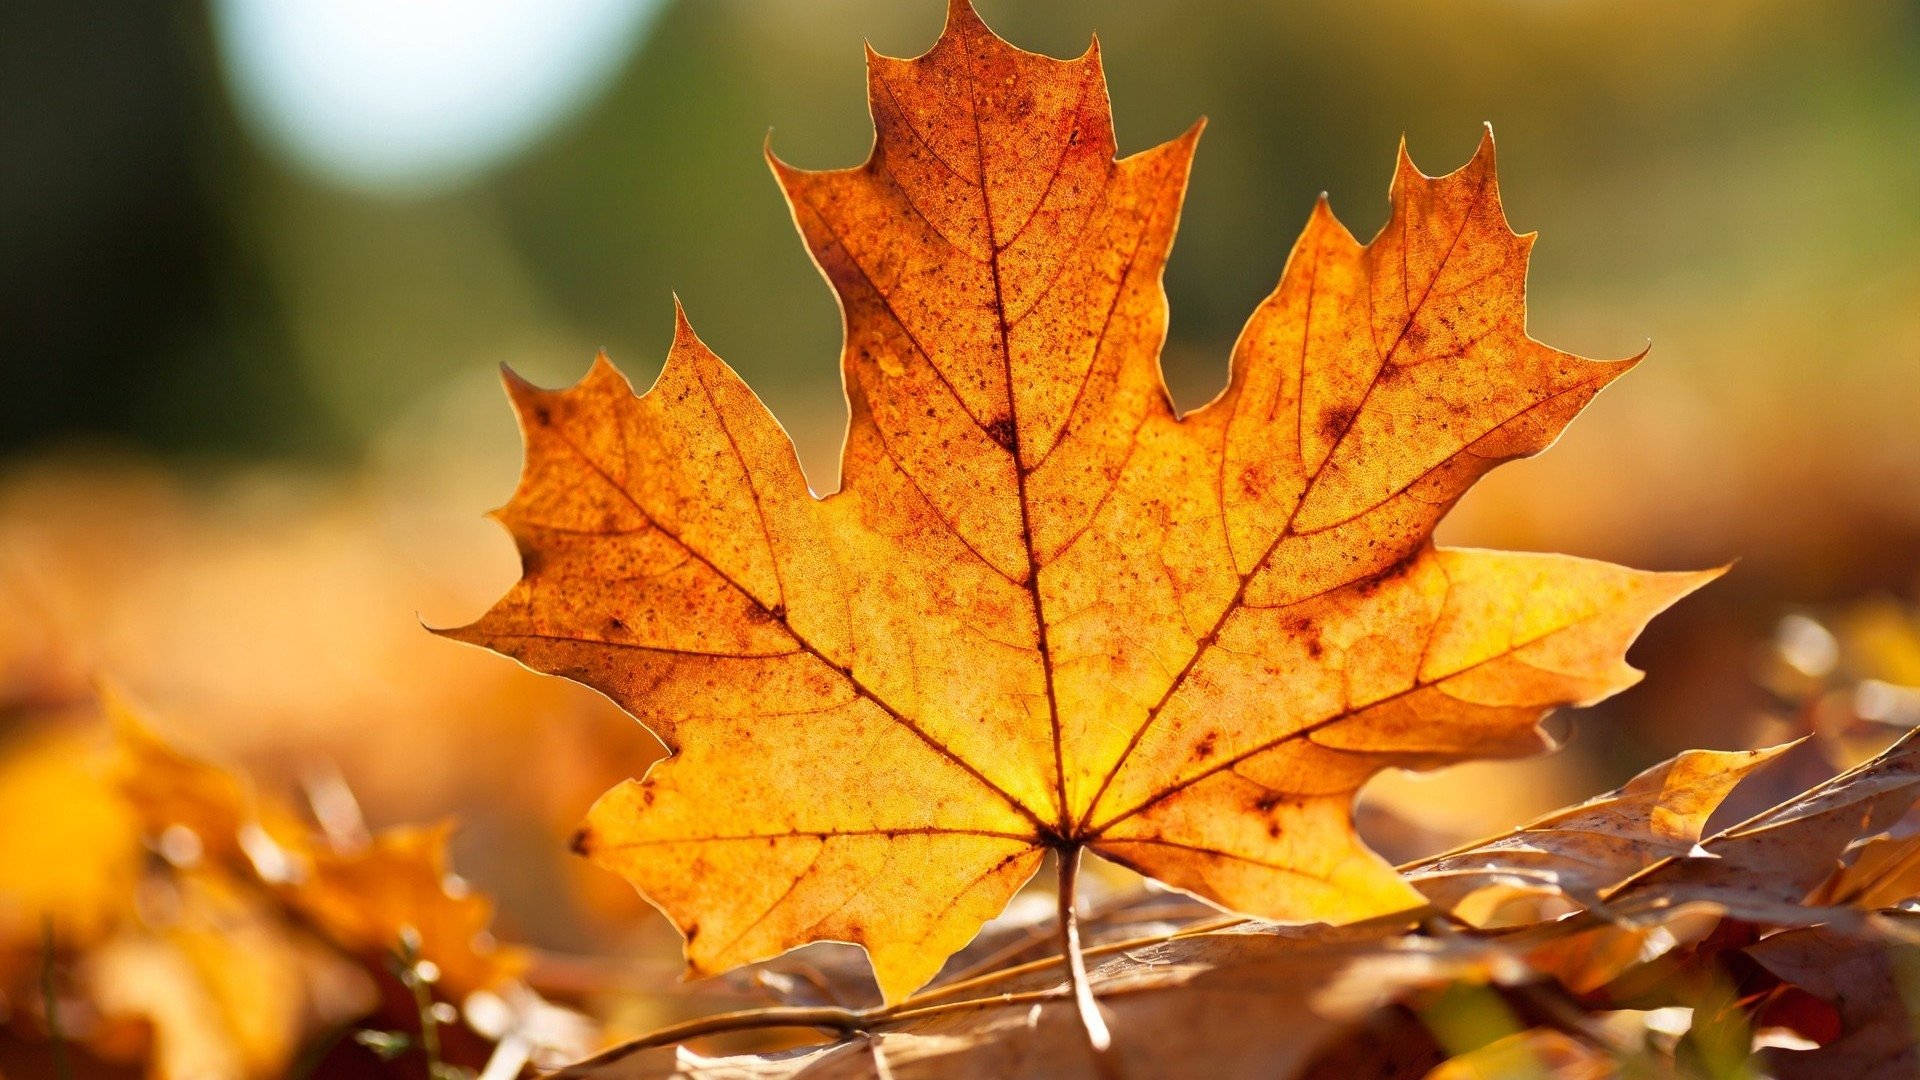 Download Toronto Maple Leafs On Dry Leaves Wallpaper 